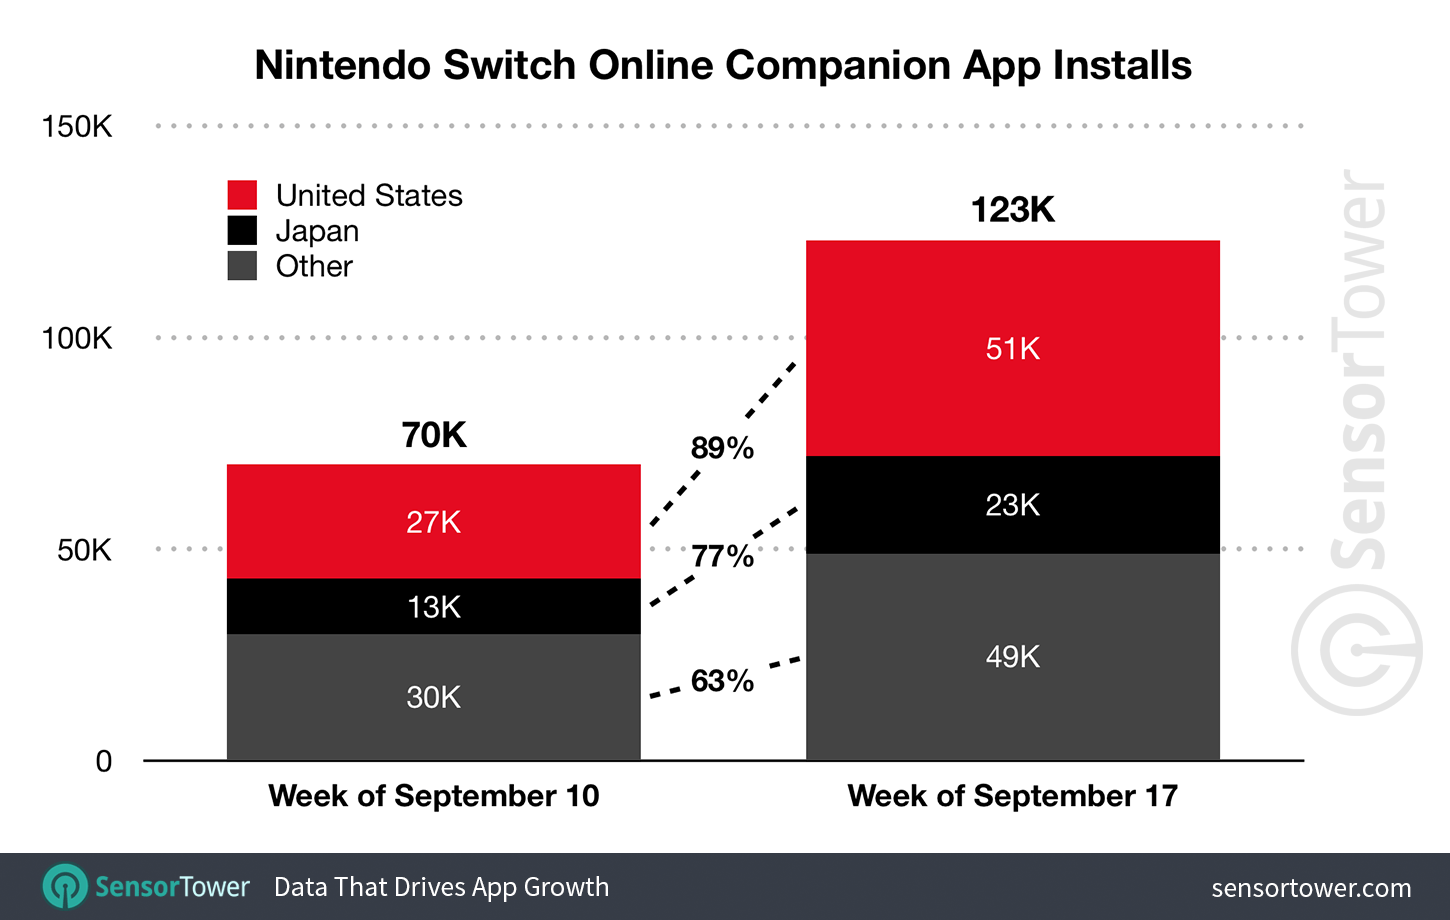 Nintendo Switch Online App Downloads Over Time